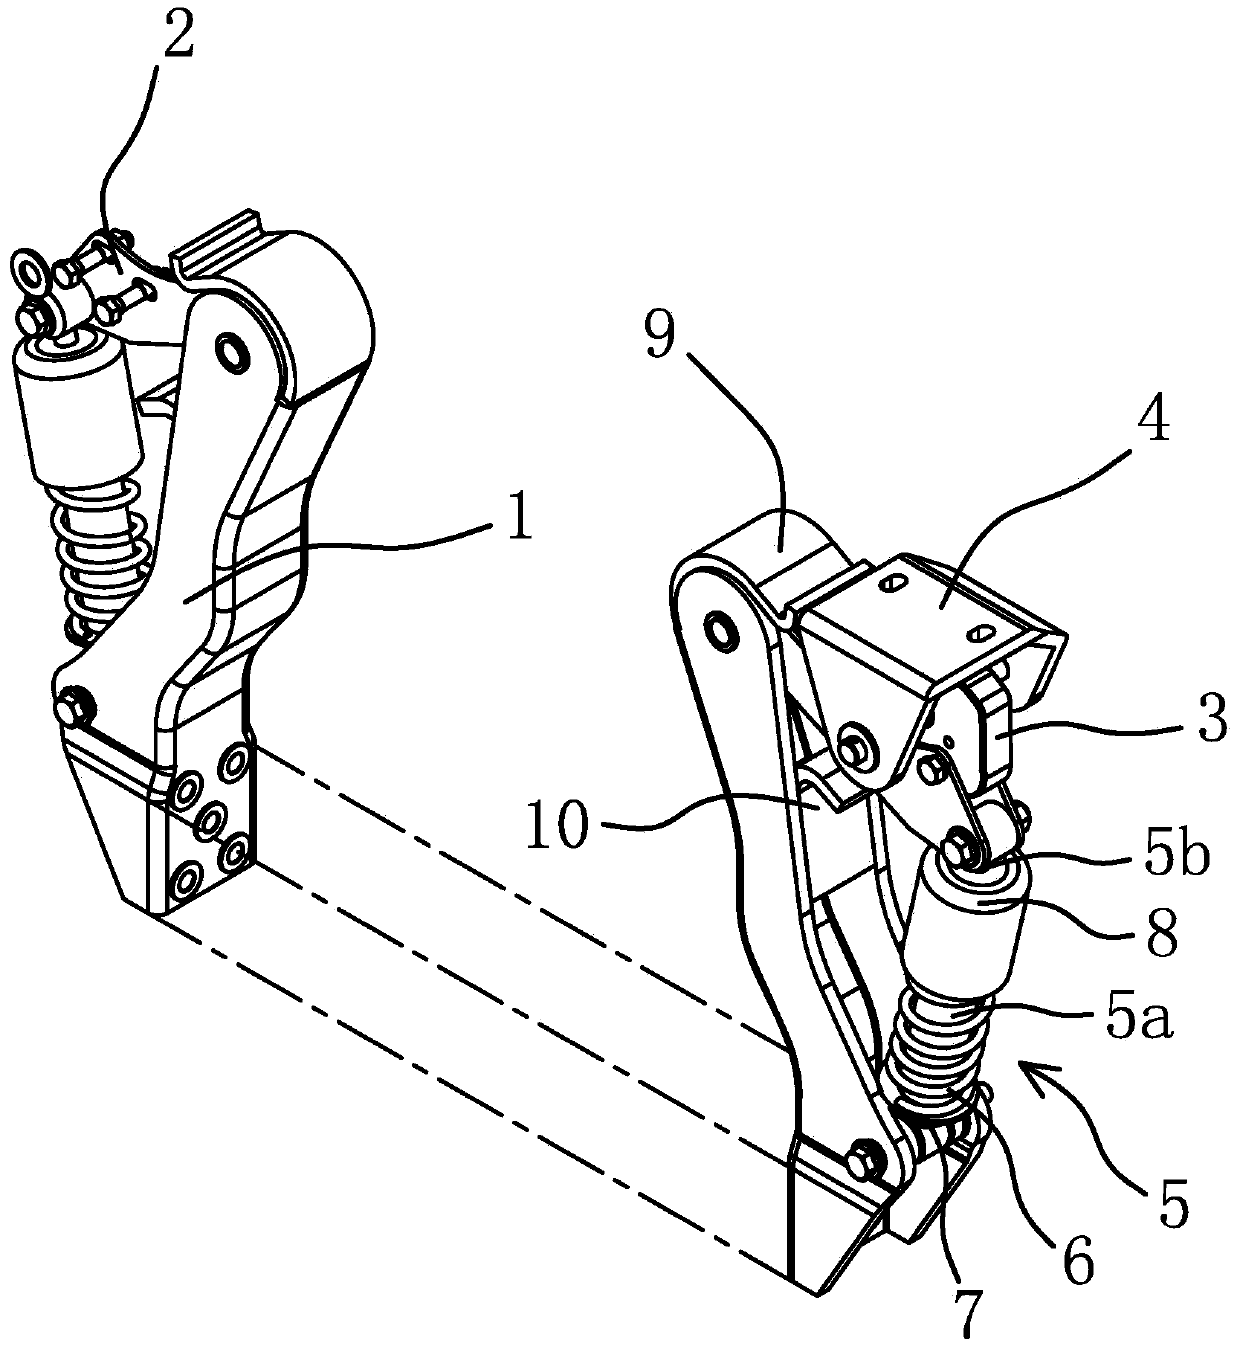 Heavily-loaded vehicle cab rear suspension device